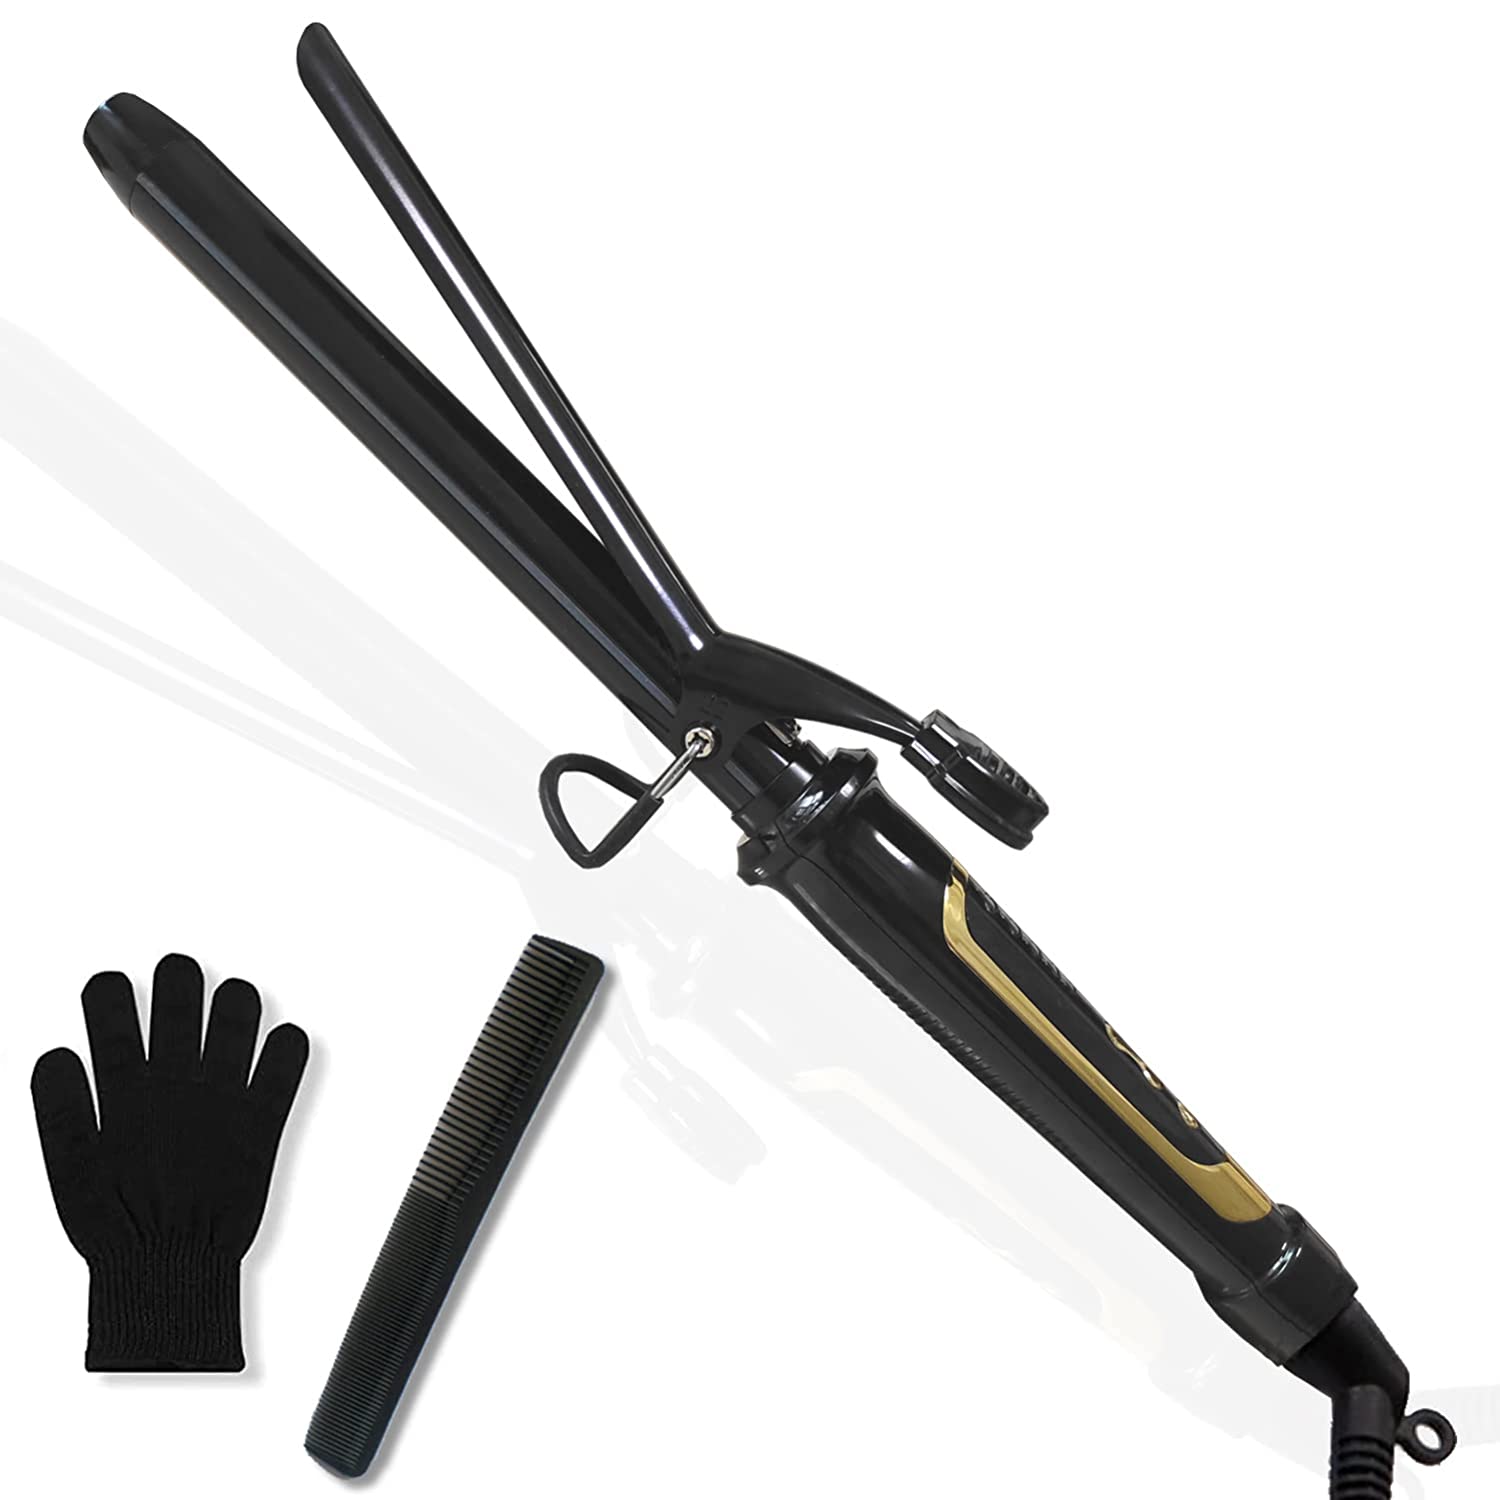 1 Inch Curling Iron with Ceramic Coating Barrel for [...]